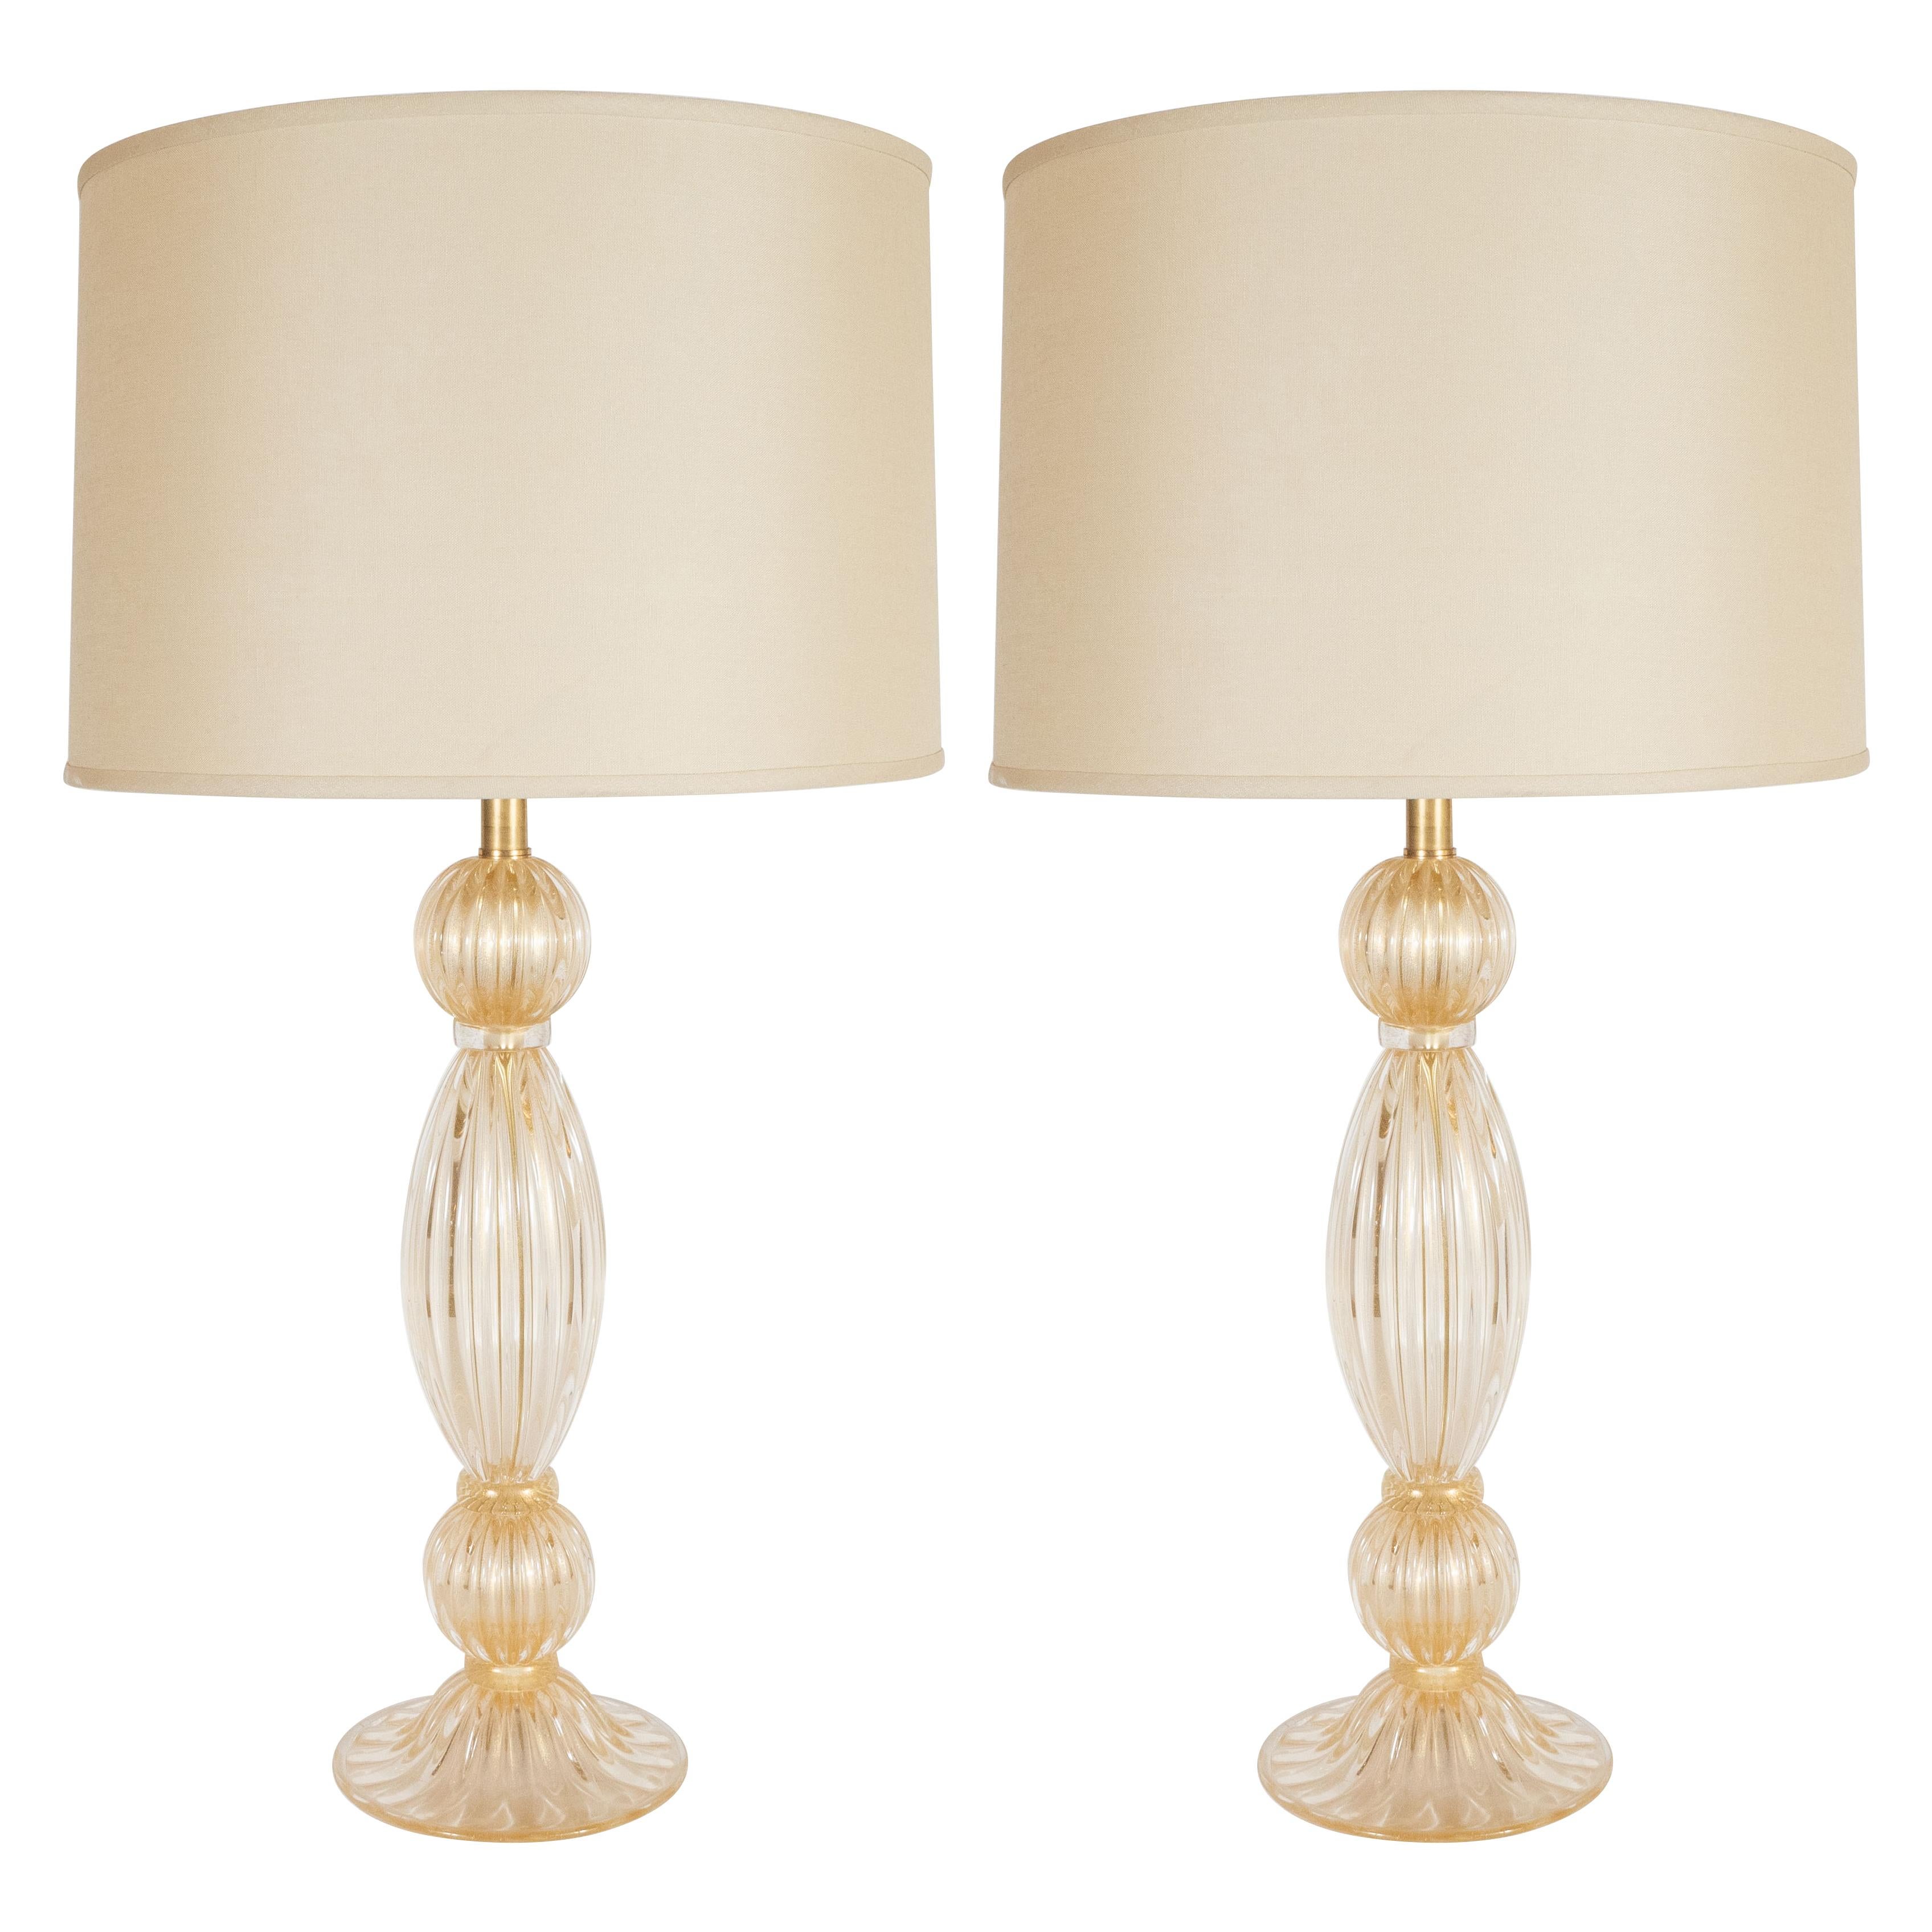 Pair of Modernist Reeded Translucent Glass Table Lamps with 24-karat Gold Flecks